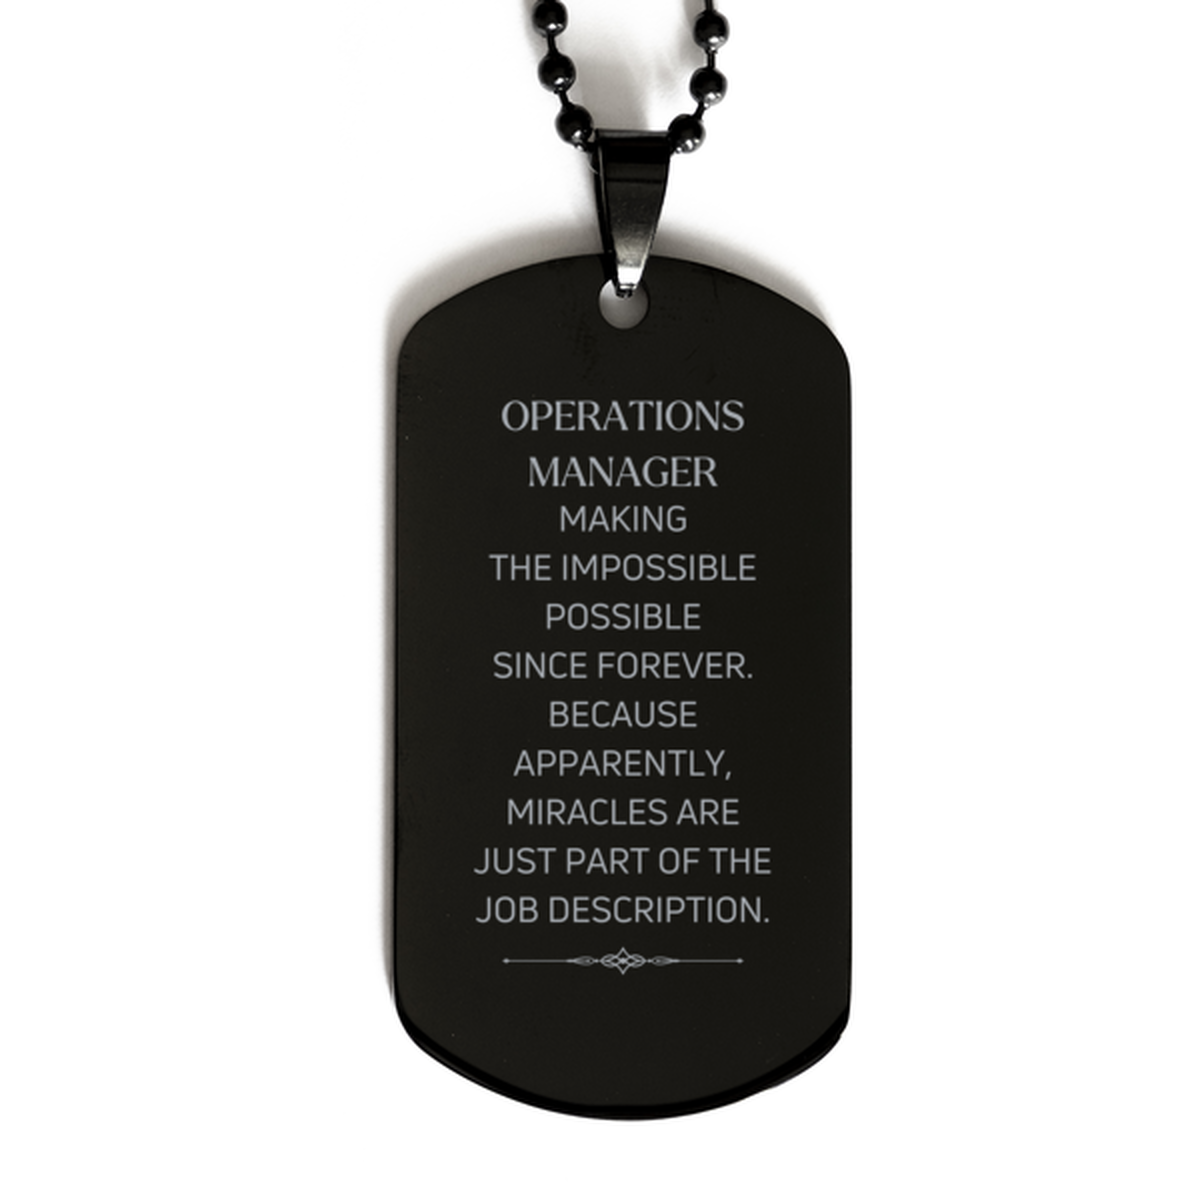 Funny Operations Manager Gifts, Miracles are just part of the job description, Inspirational Birthday Black Dog Tag For Operations Manager, Men, Women, Coworkers, Friends, Boss